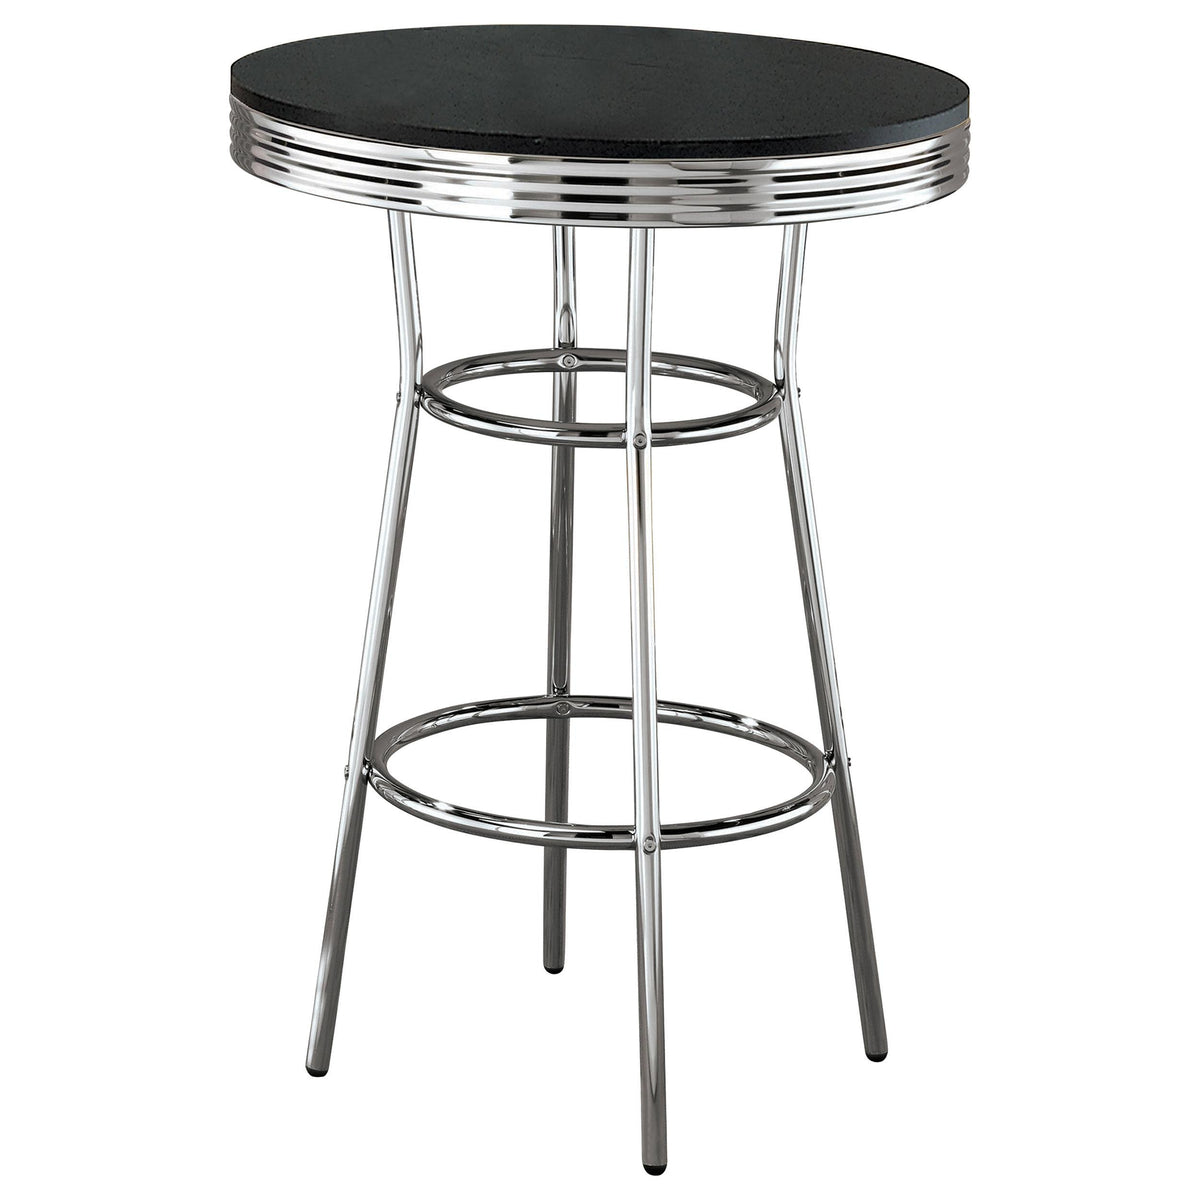 Theodore Round Bar Table Black and Chrome  Las Vegas Furniture Stores